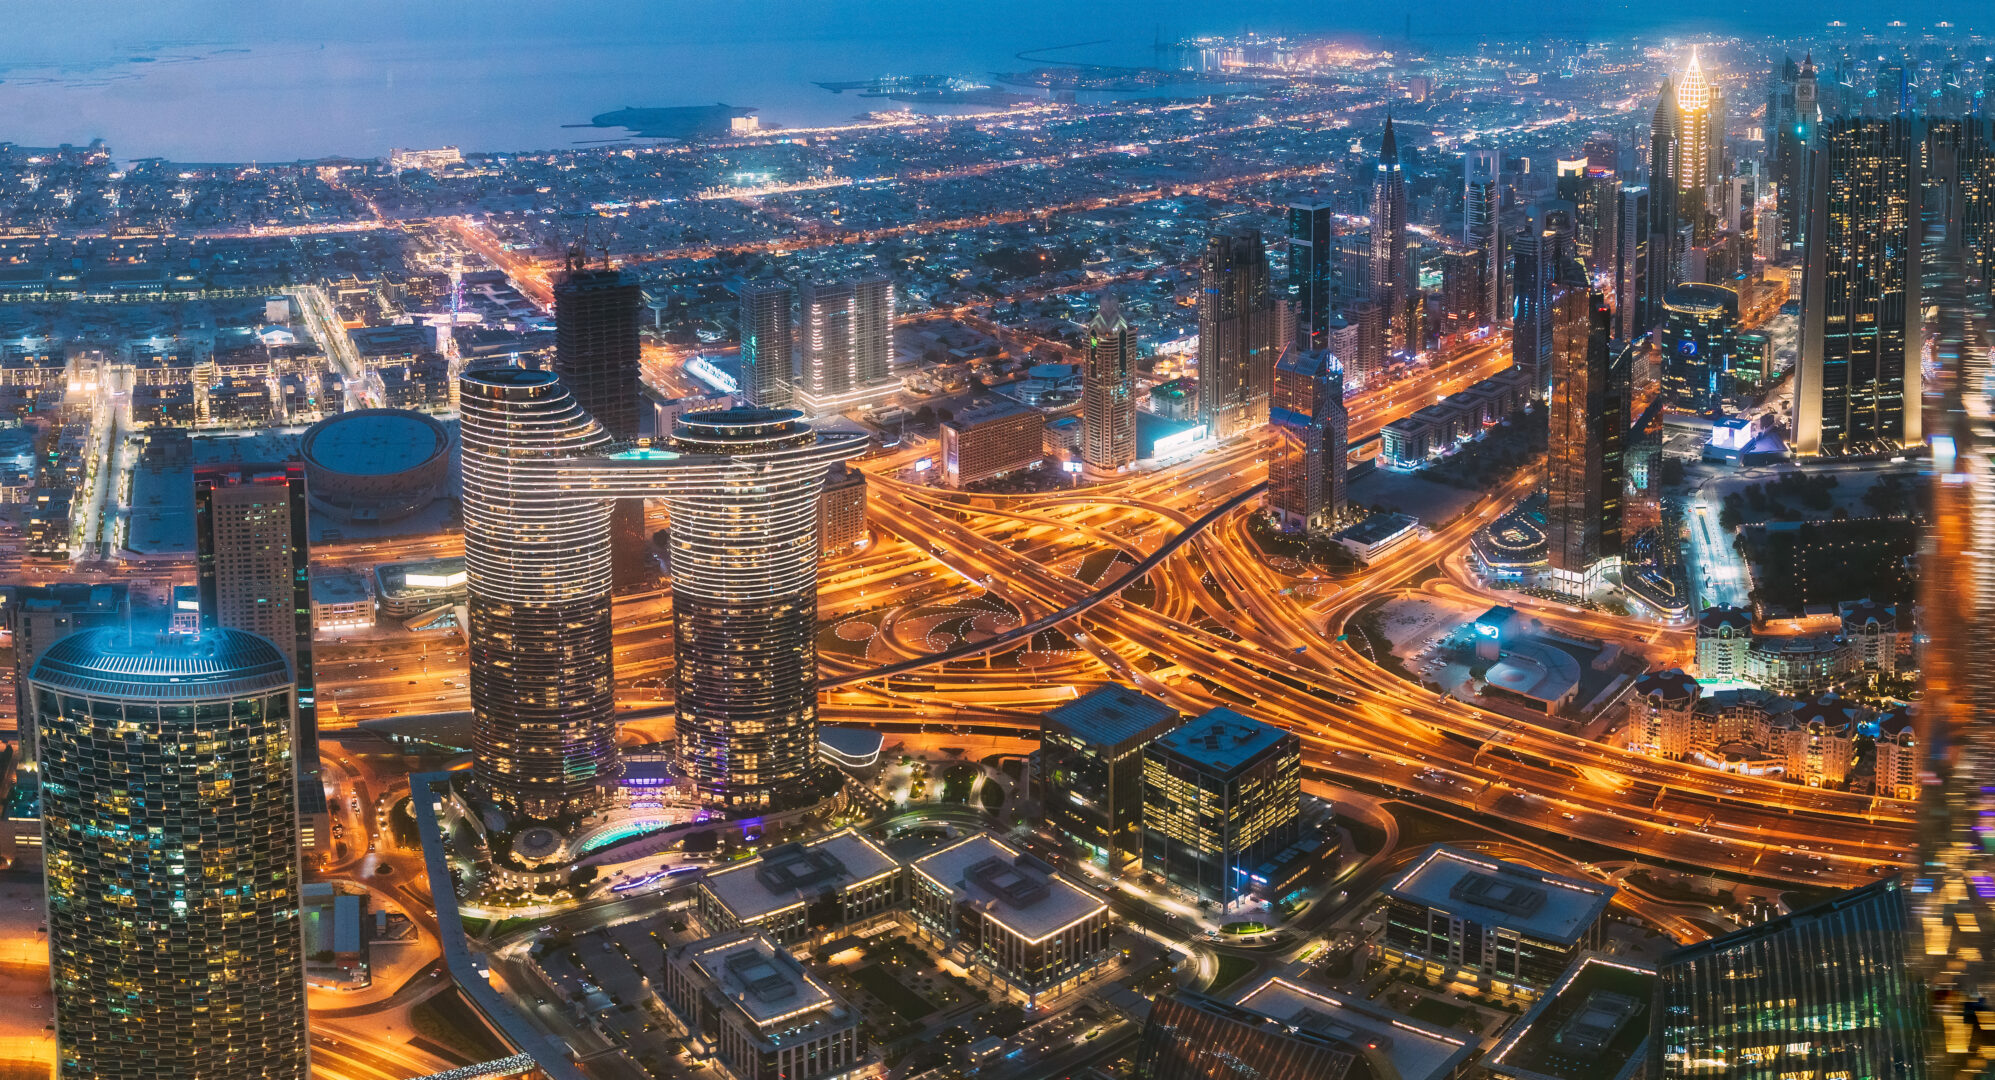 aerial-view-of-evening-night-scenic-view-of-skyscraper-in-dubai-street-night-traffic-in-dudai-skyline-waterfront-and-dubai-cityscape-in-summer-evening-illuminations-urban-background-high-quality-p-2